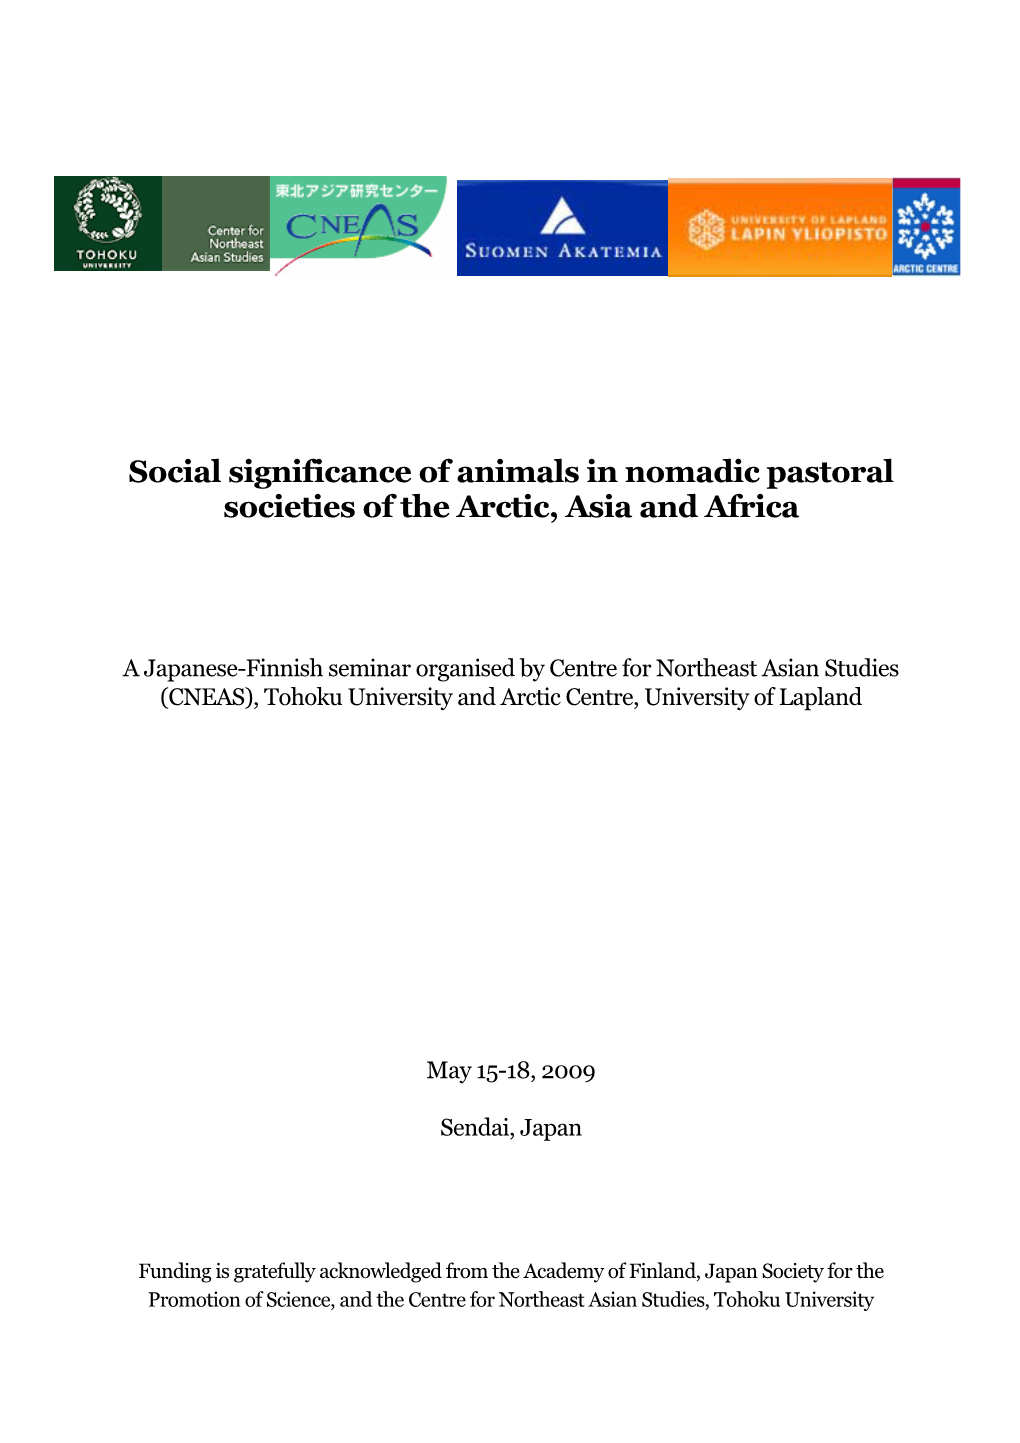 Social Significance of Animals in Nomadic Pastoral Societies of the Arctic, Asia and Africa